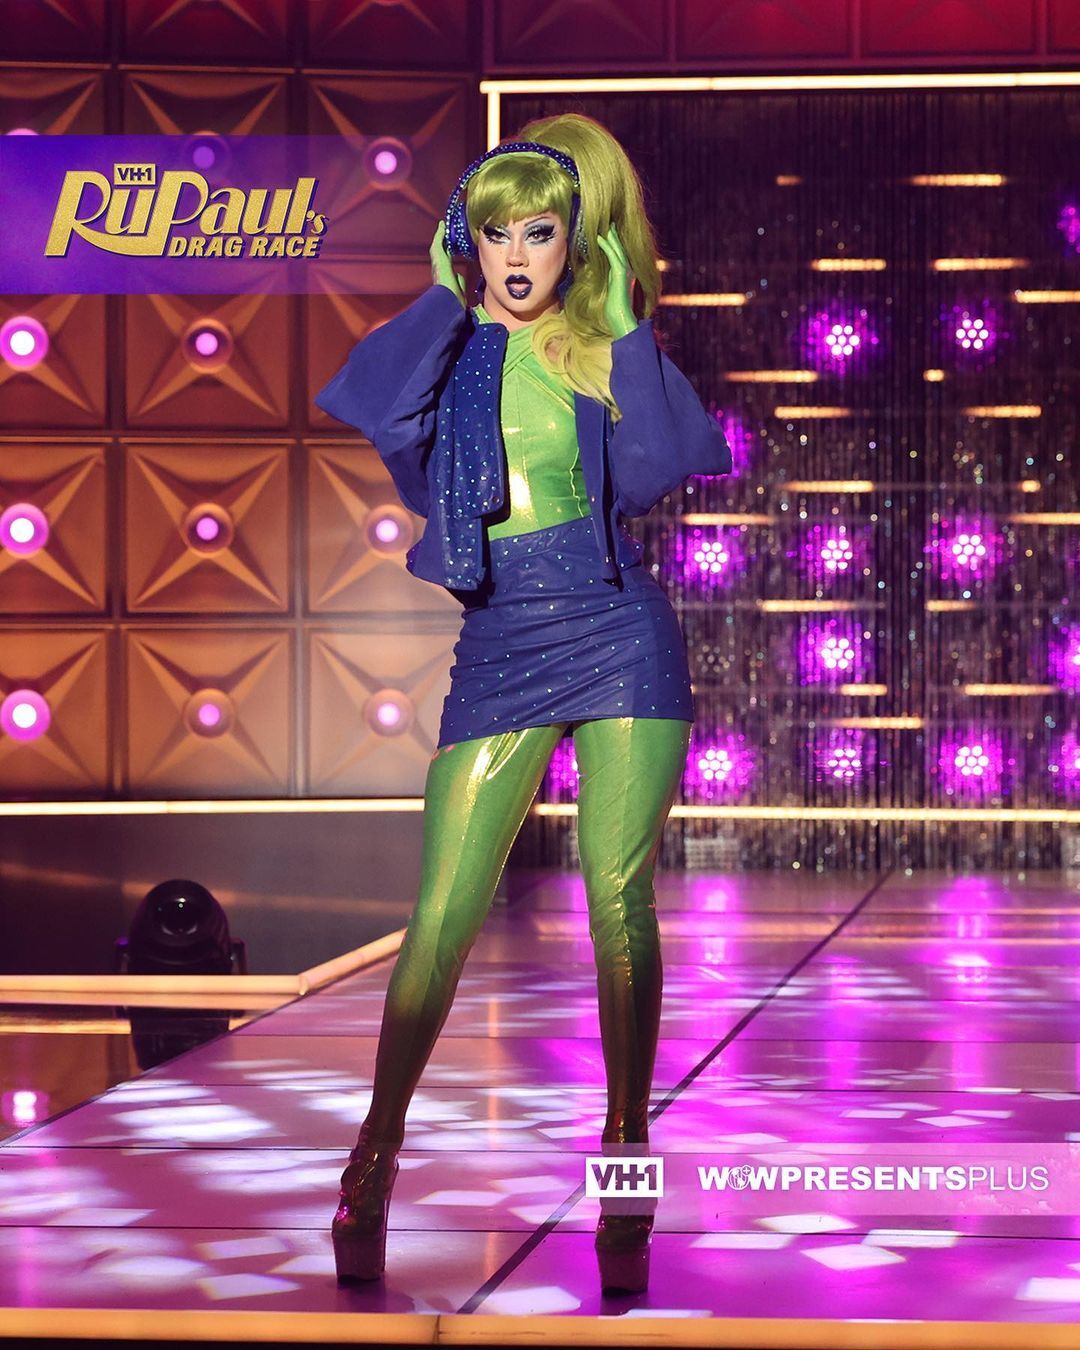 Willow's Signature Showstopping Drag look.